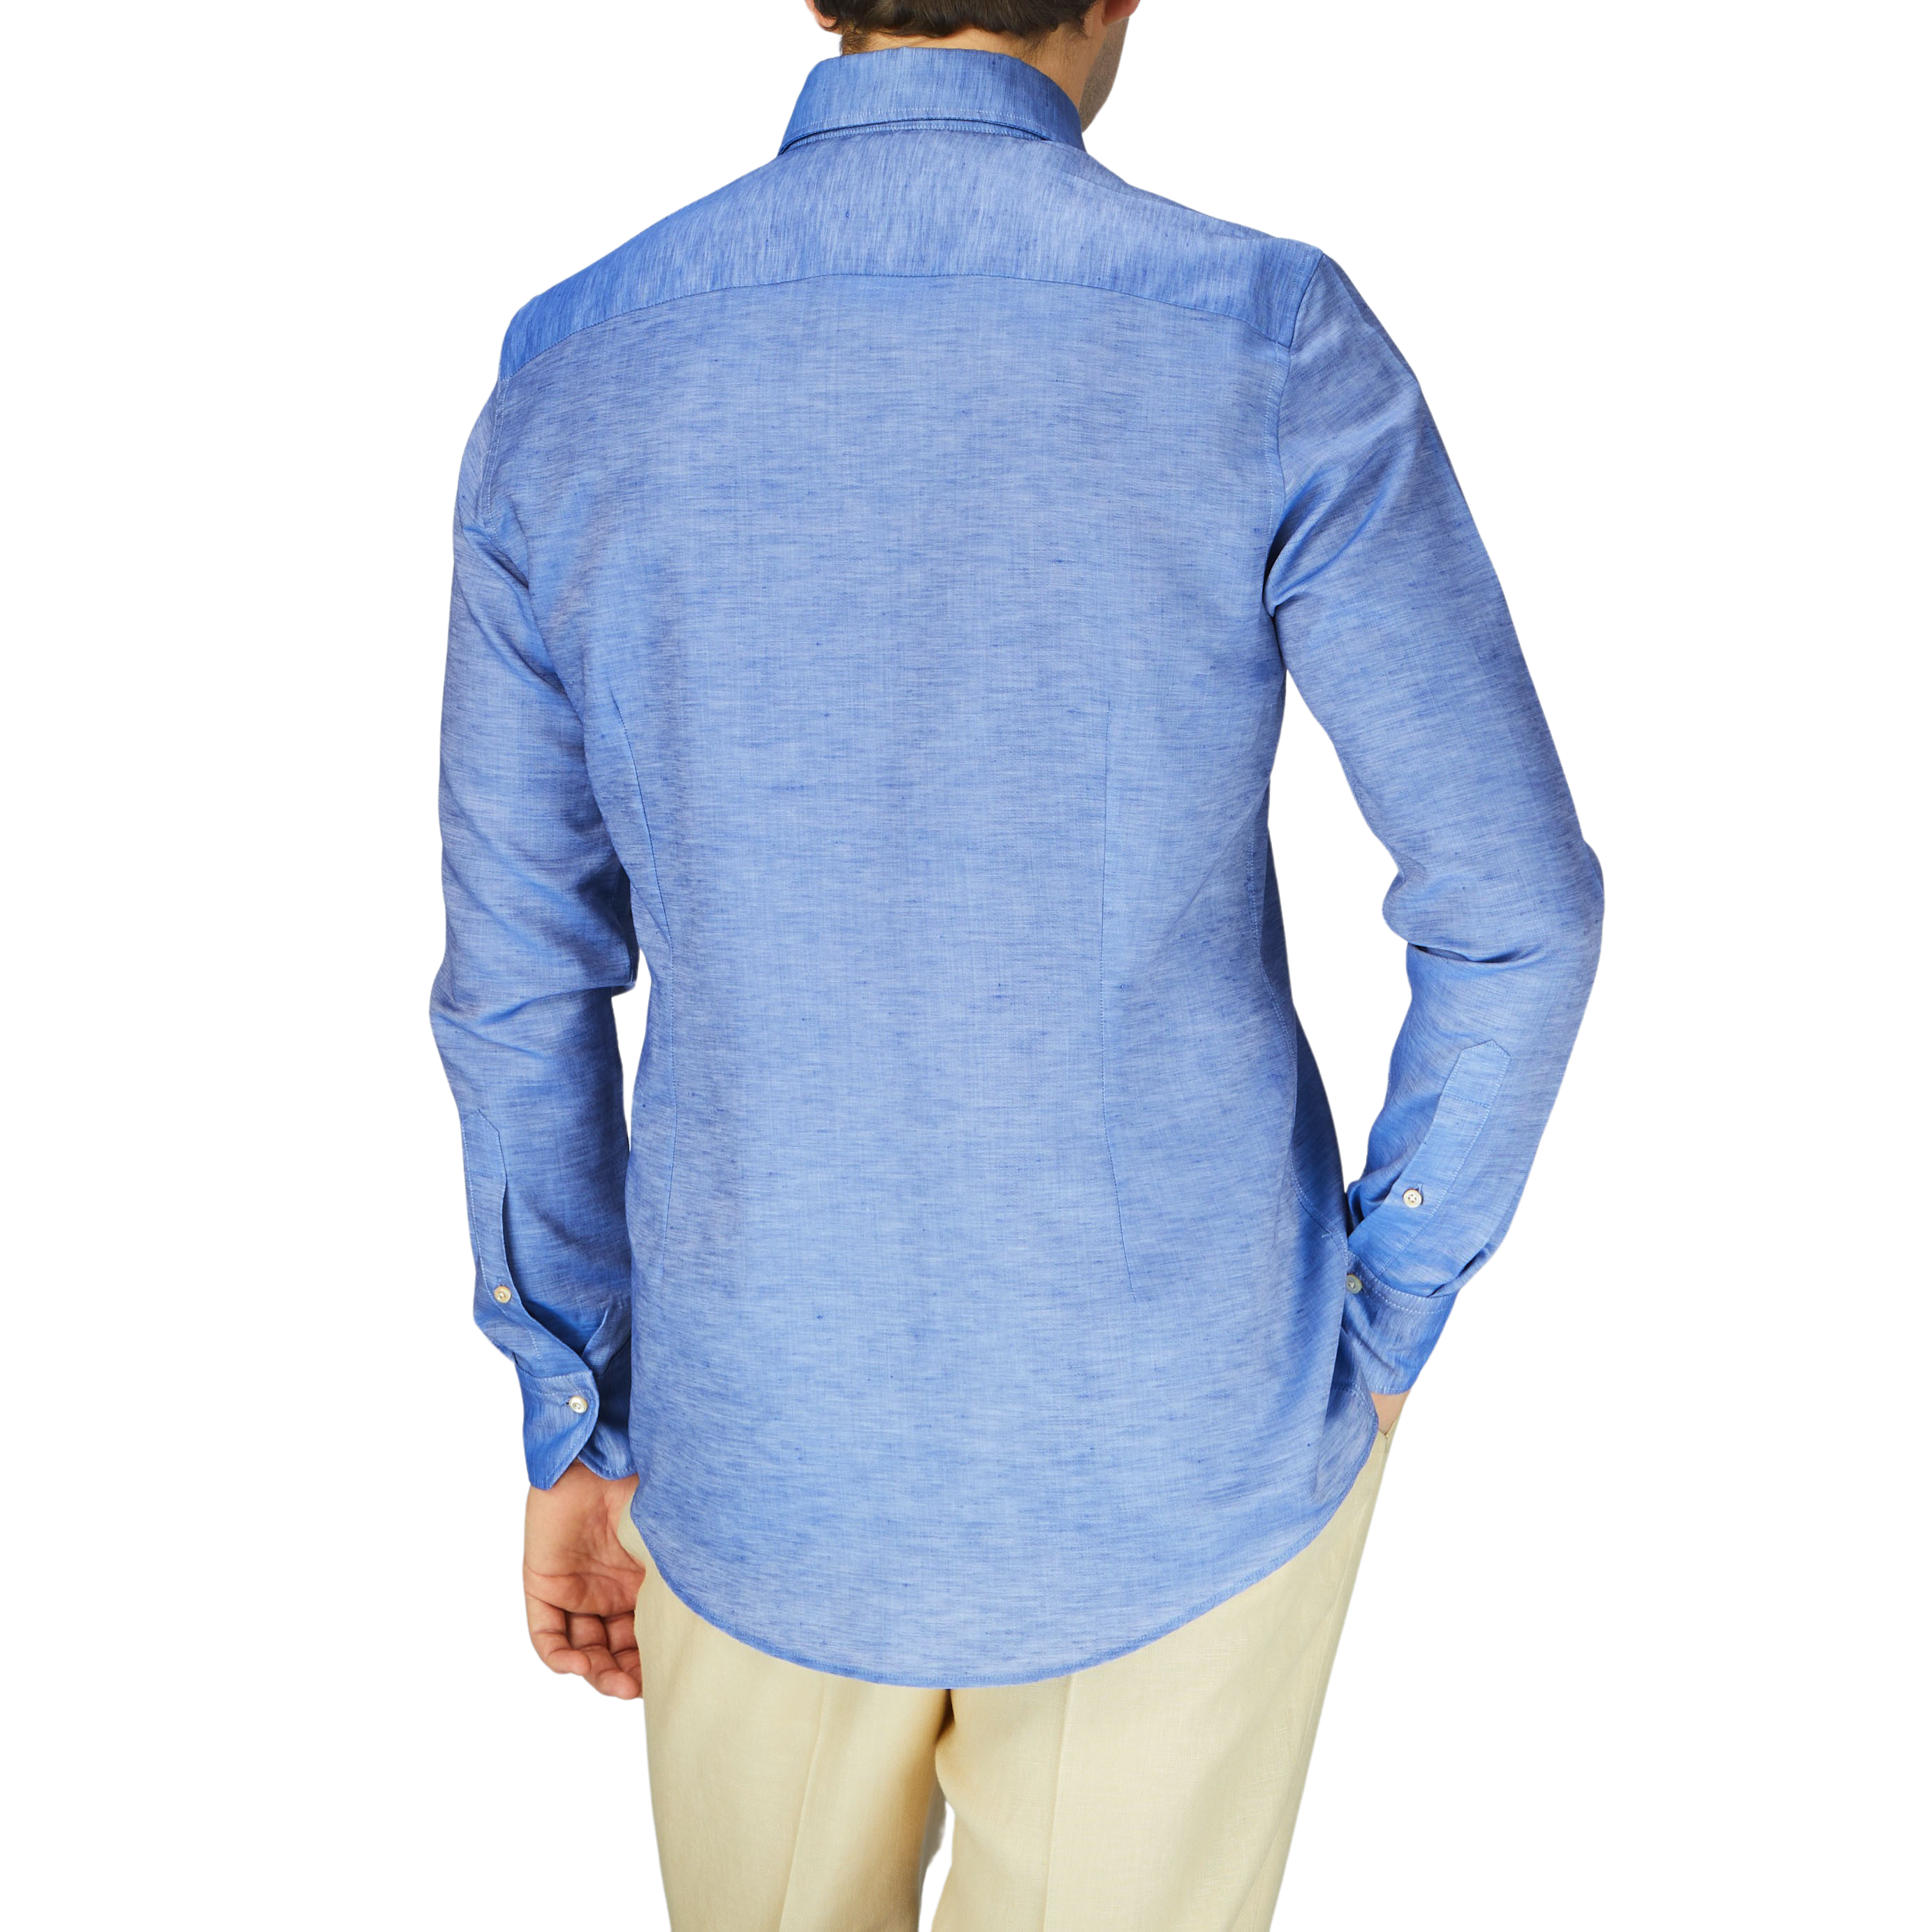 The man is wearing a casual Blue Melange Cotton Linen Slimline shirt from Stenströms, showcasing a slim fit.